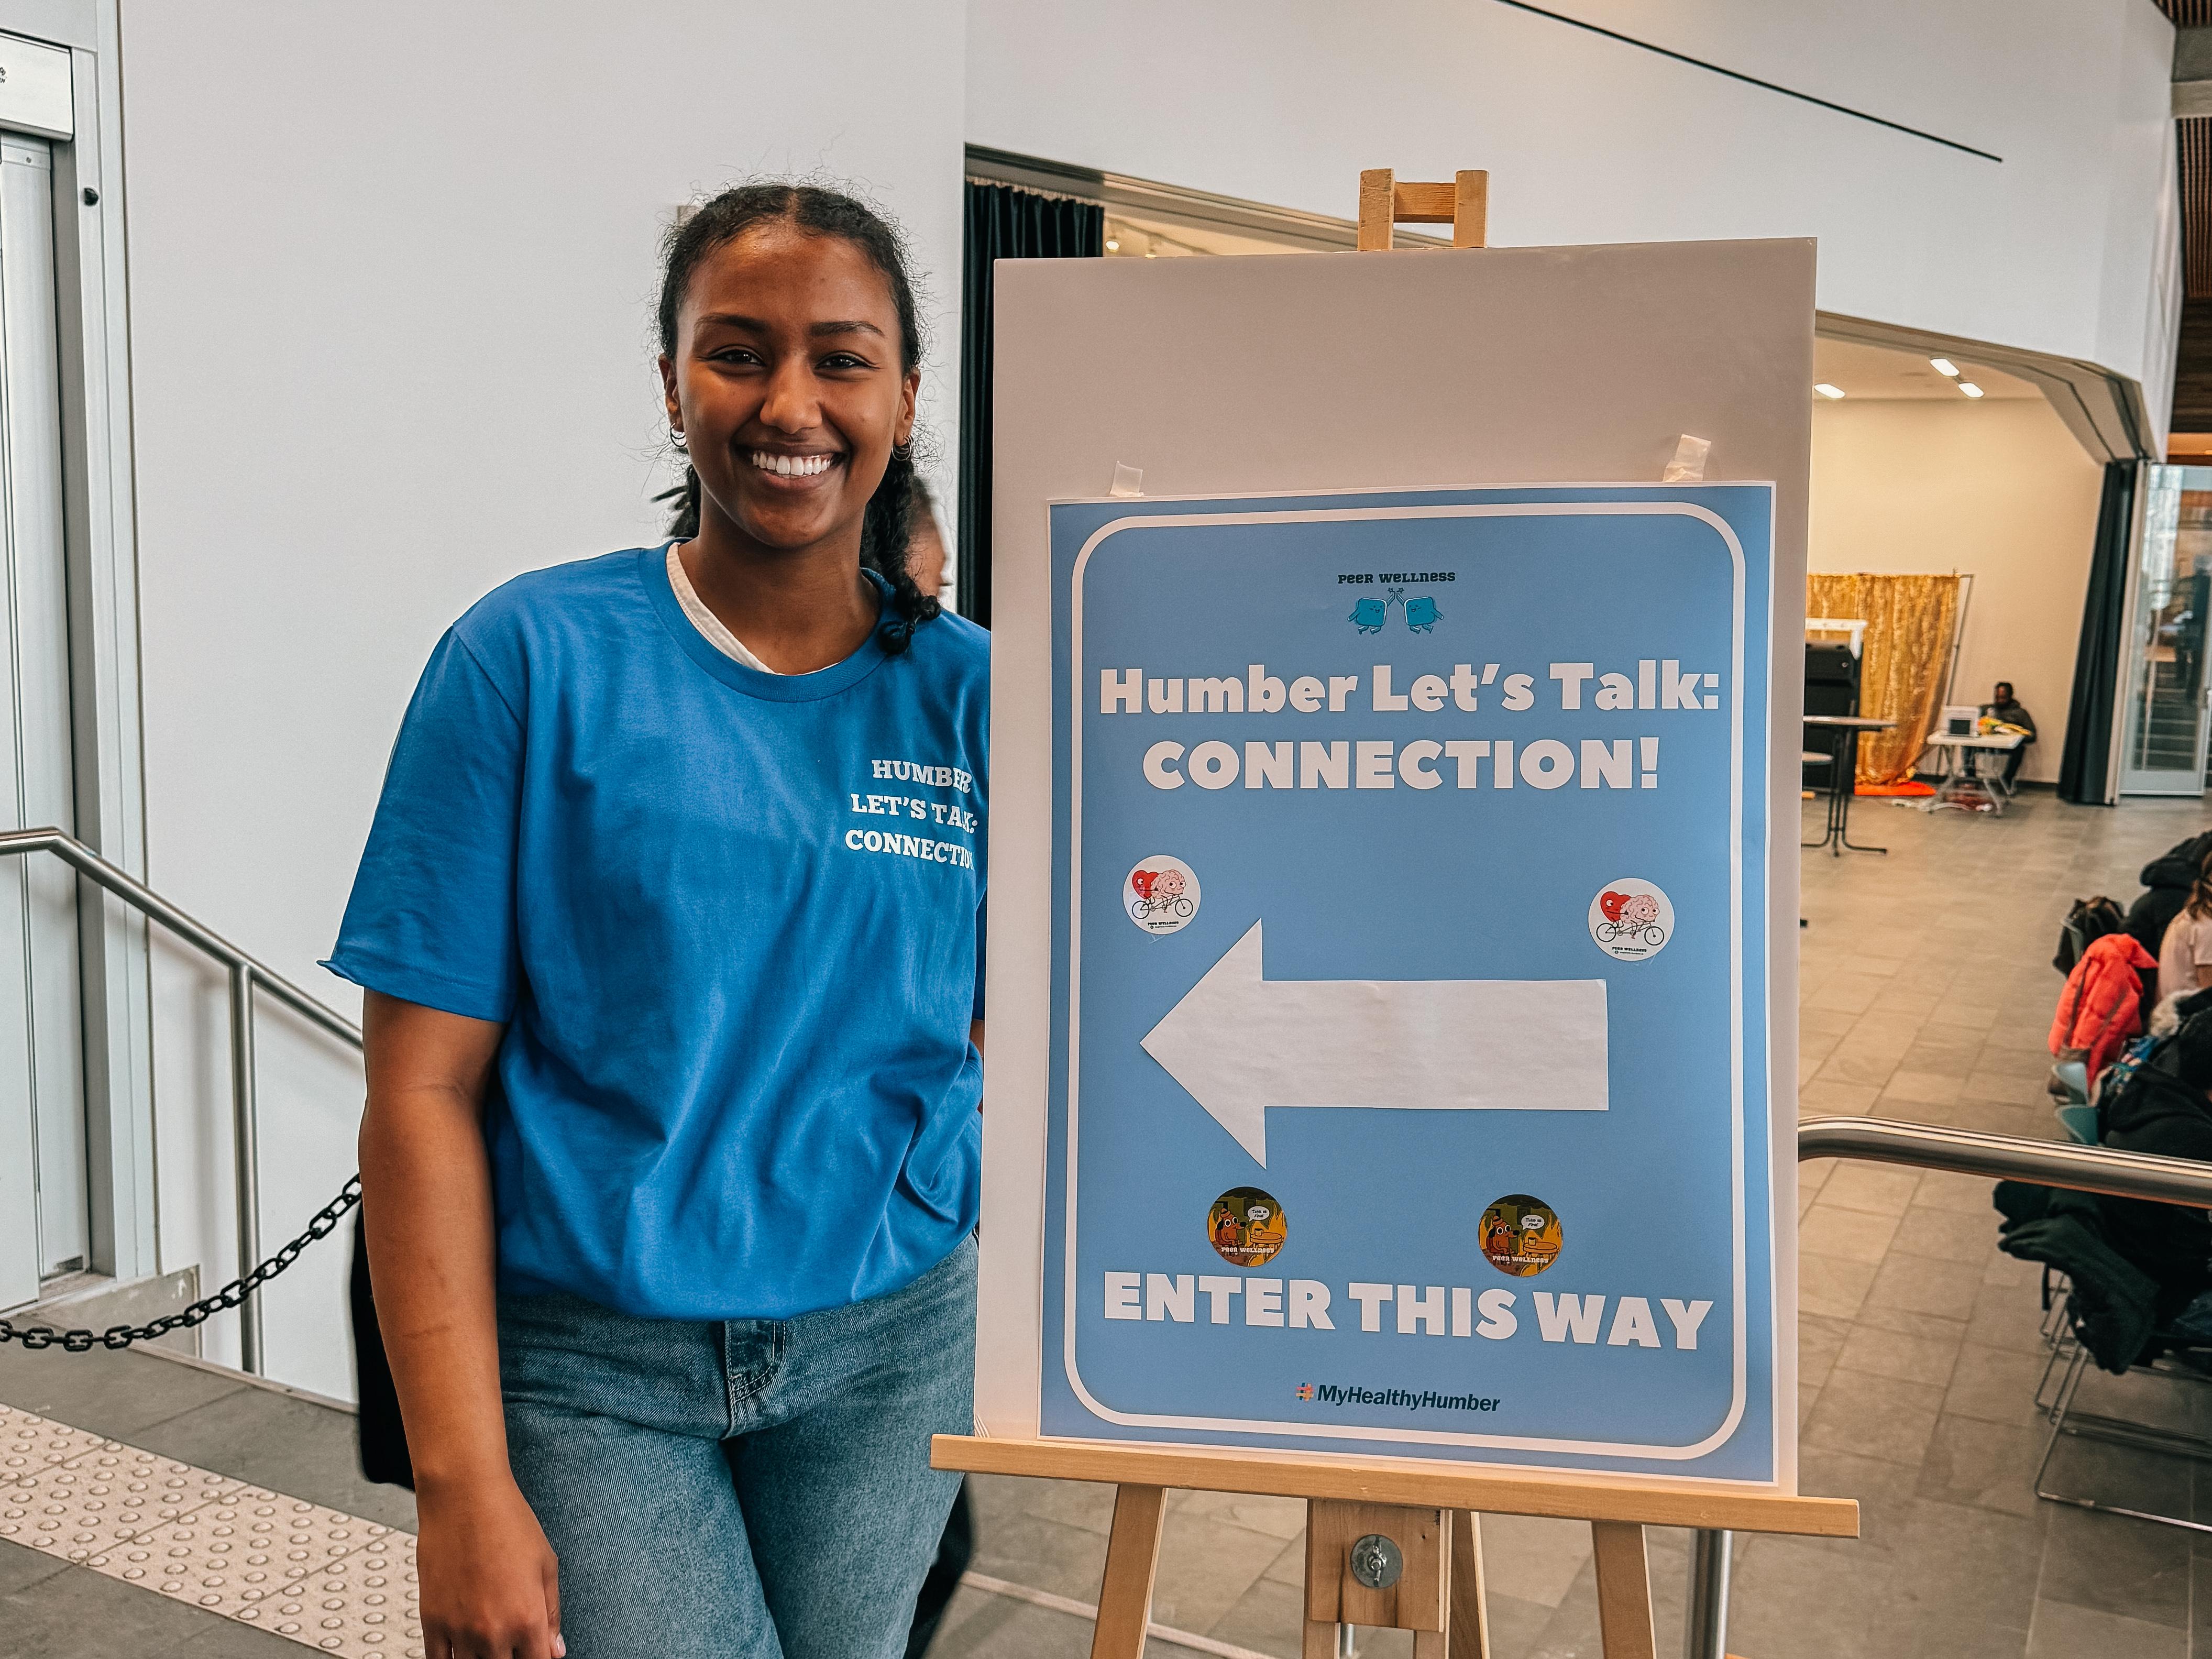 A smiling person stands next to a sign that reads Humber Let’s Talk.